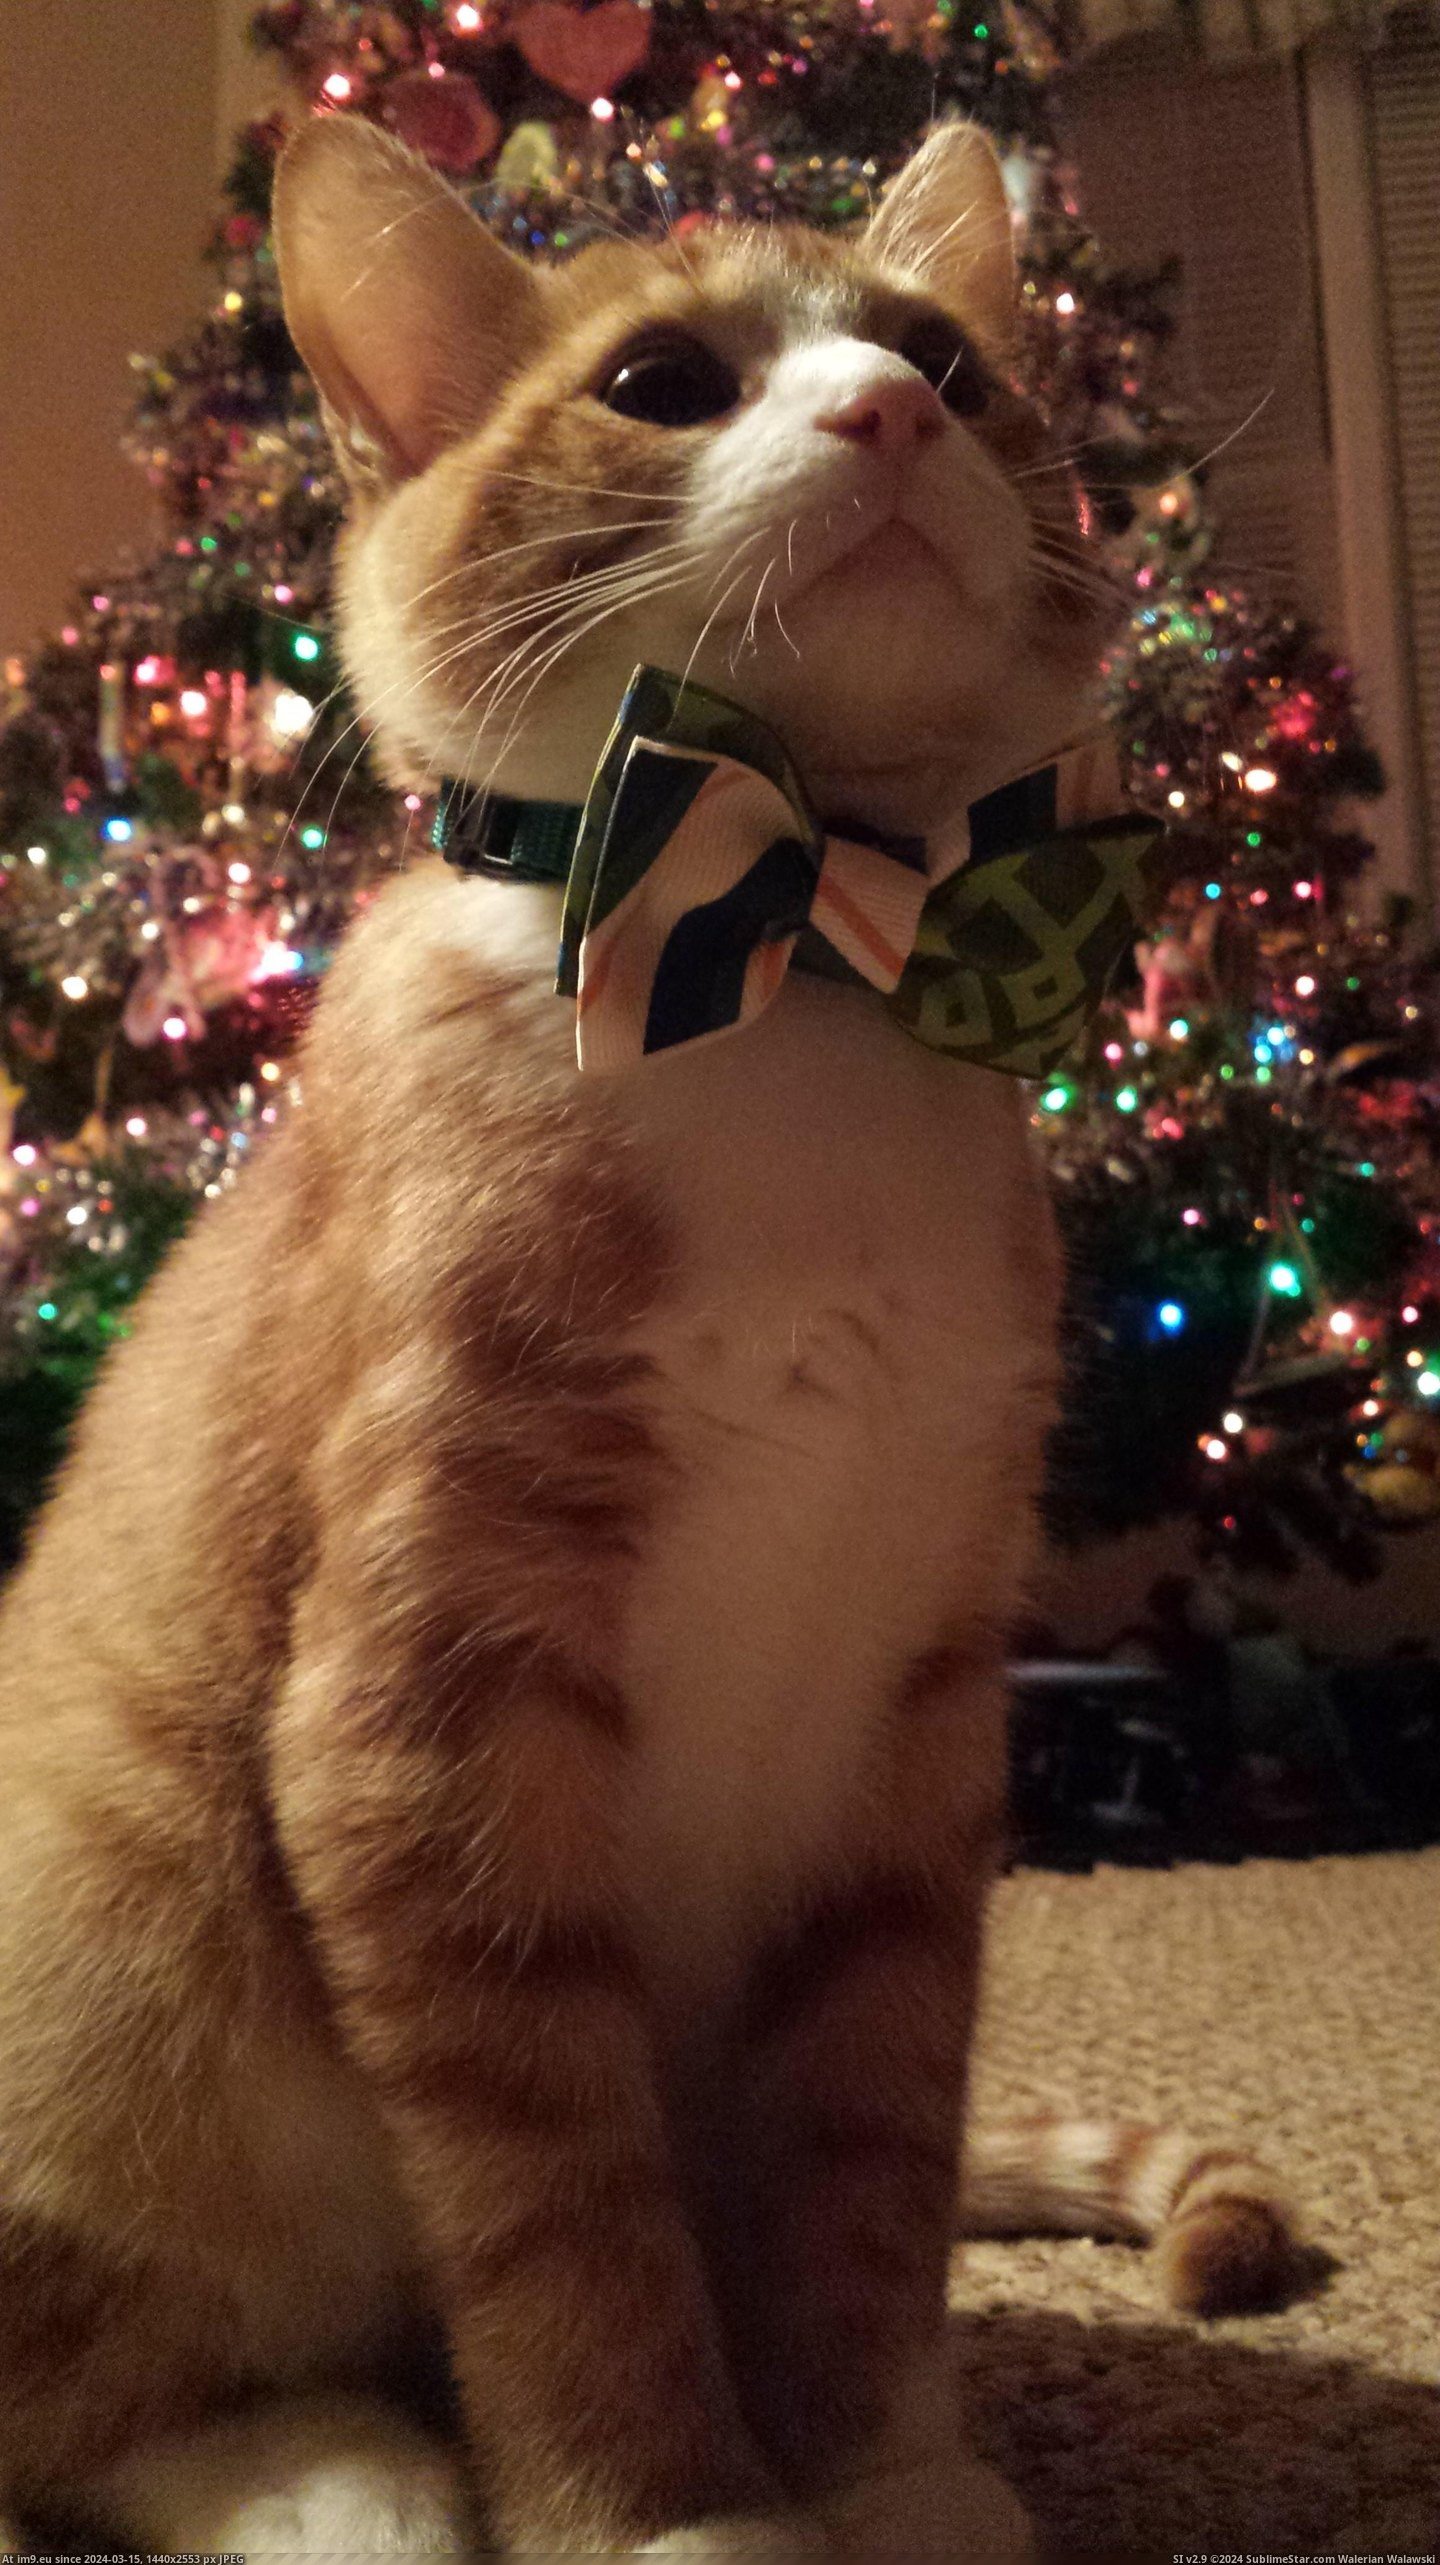 #For #Man #Ready #Christmas [Aww] My man ready for his first Christmas Pic. (Изображение из альбом My r/AWW favs))